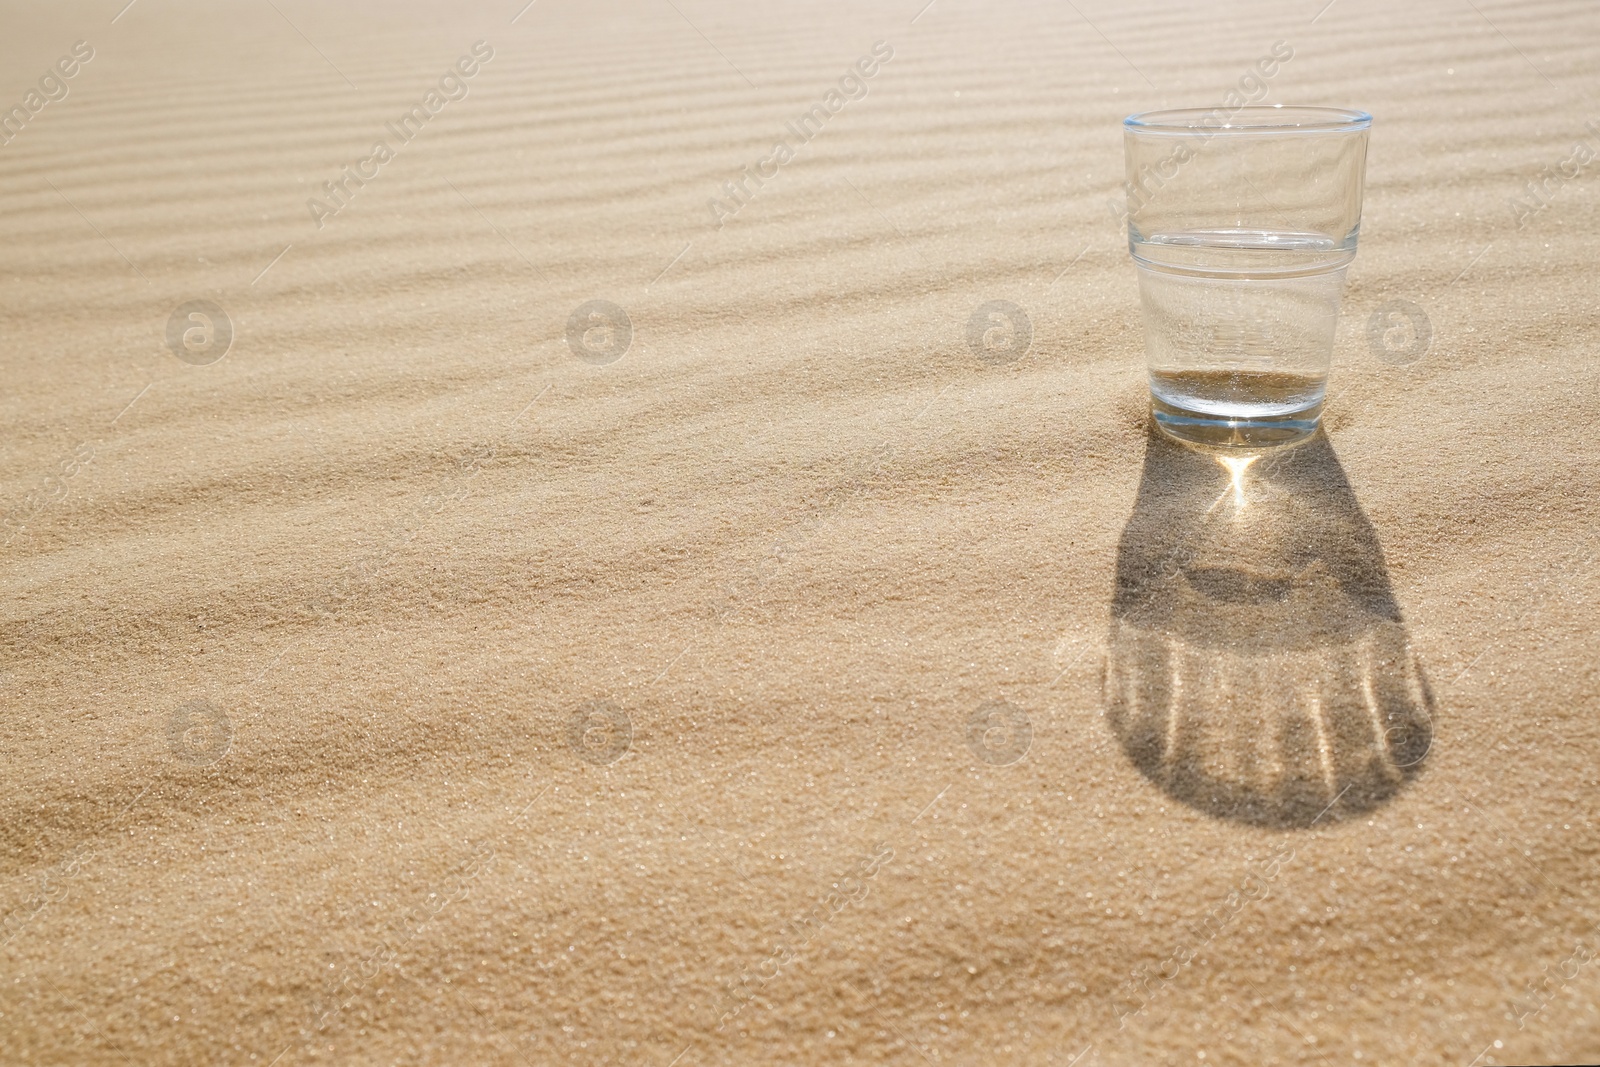 Photo of Glass of water on sand in desert. Space for text